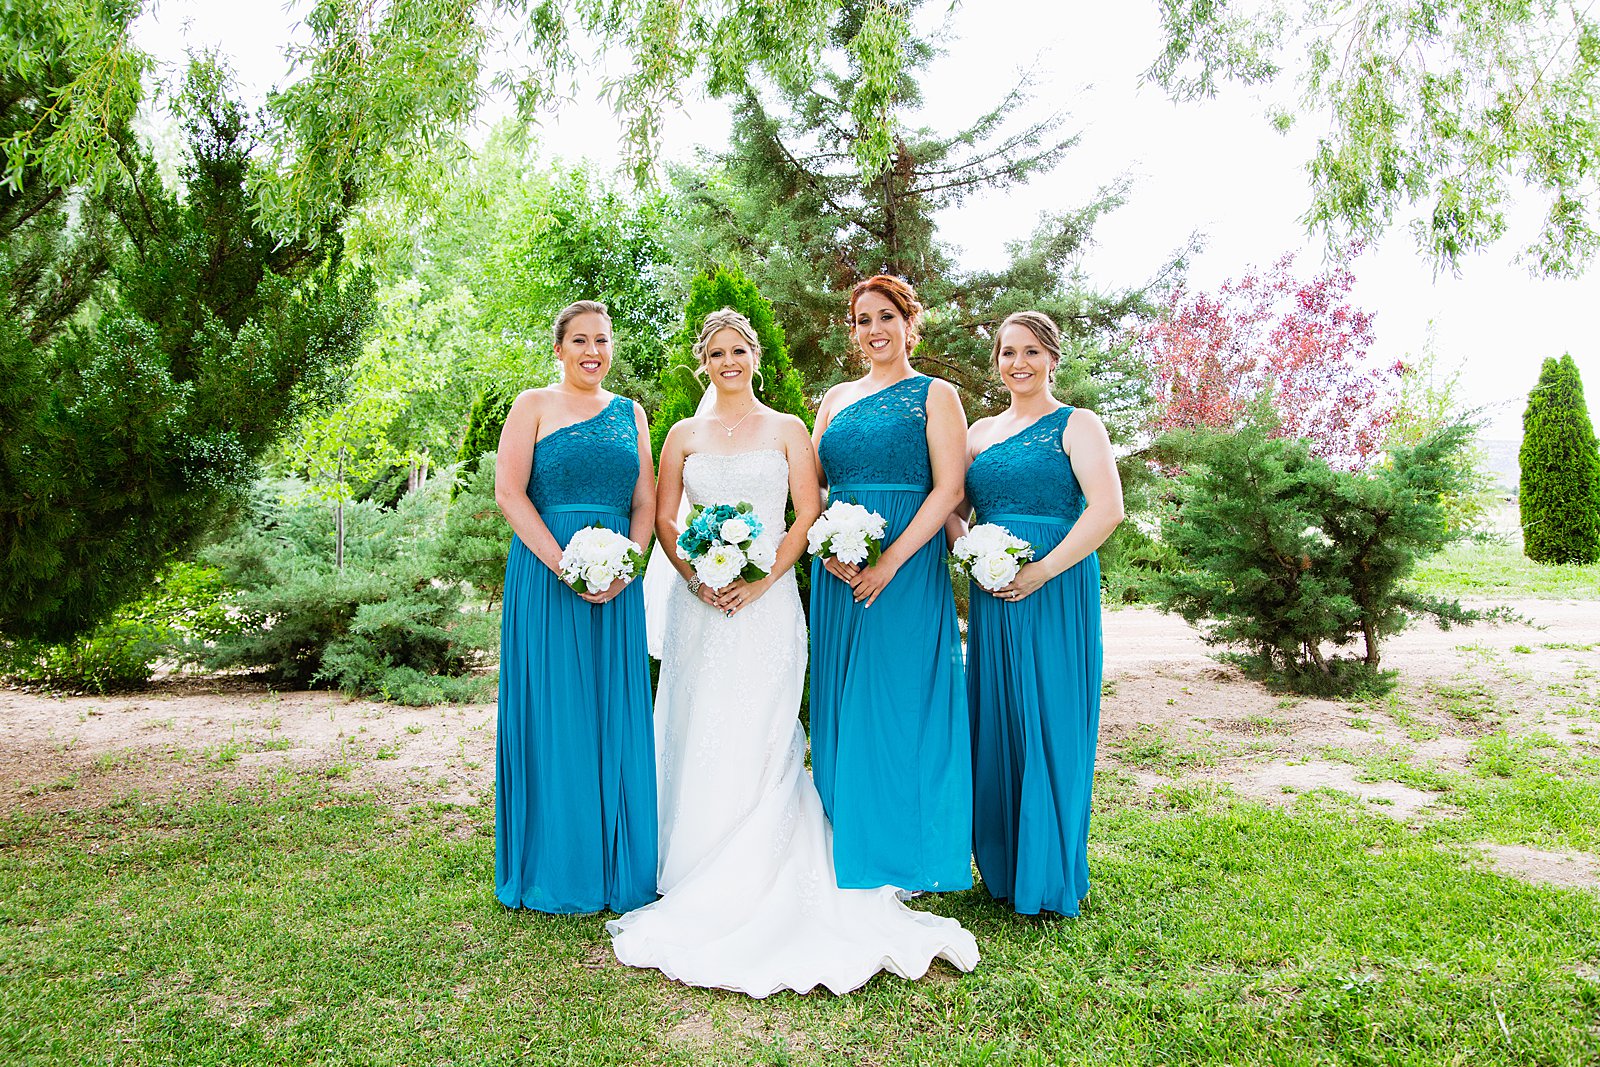 Bride and bridesmaids together at a The Windmill House wedding by Arizona wedding photographer PMA Photography.